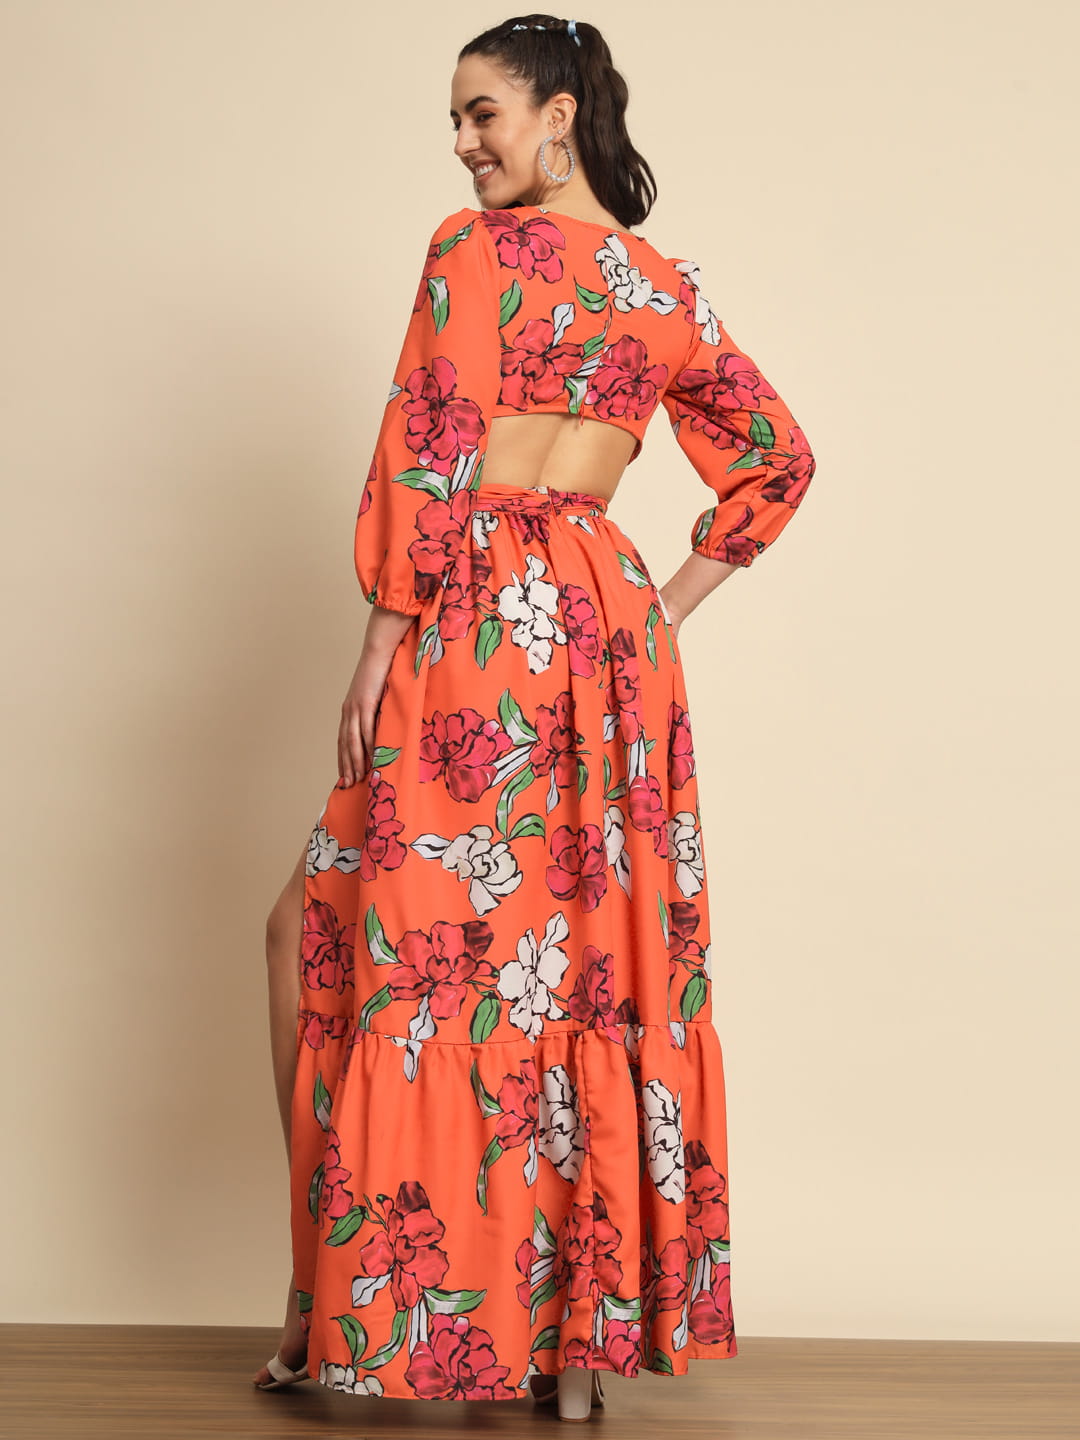 Sunset Whispers: An Orange Cutout Dress with Knot Detail | Hues of India